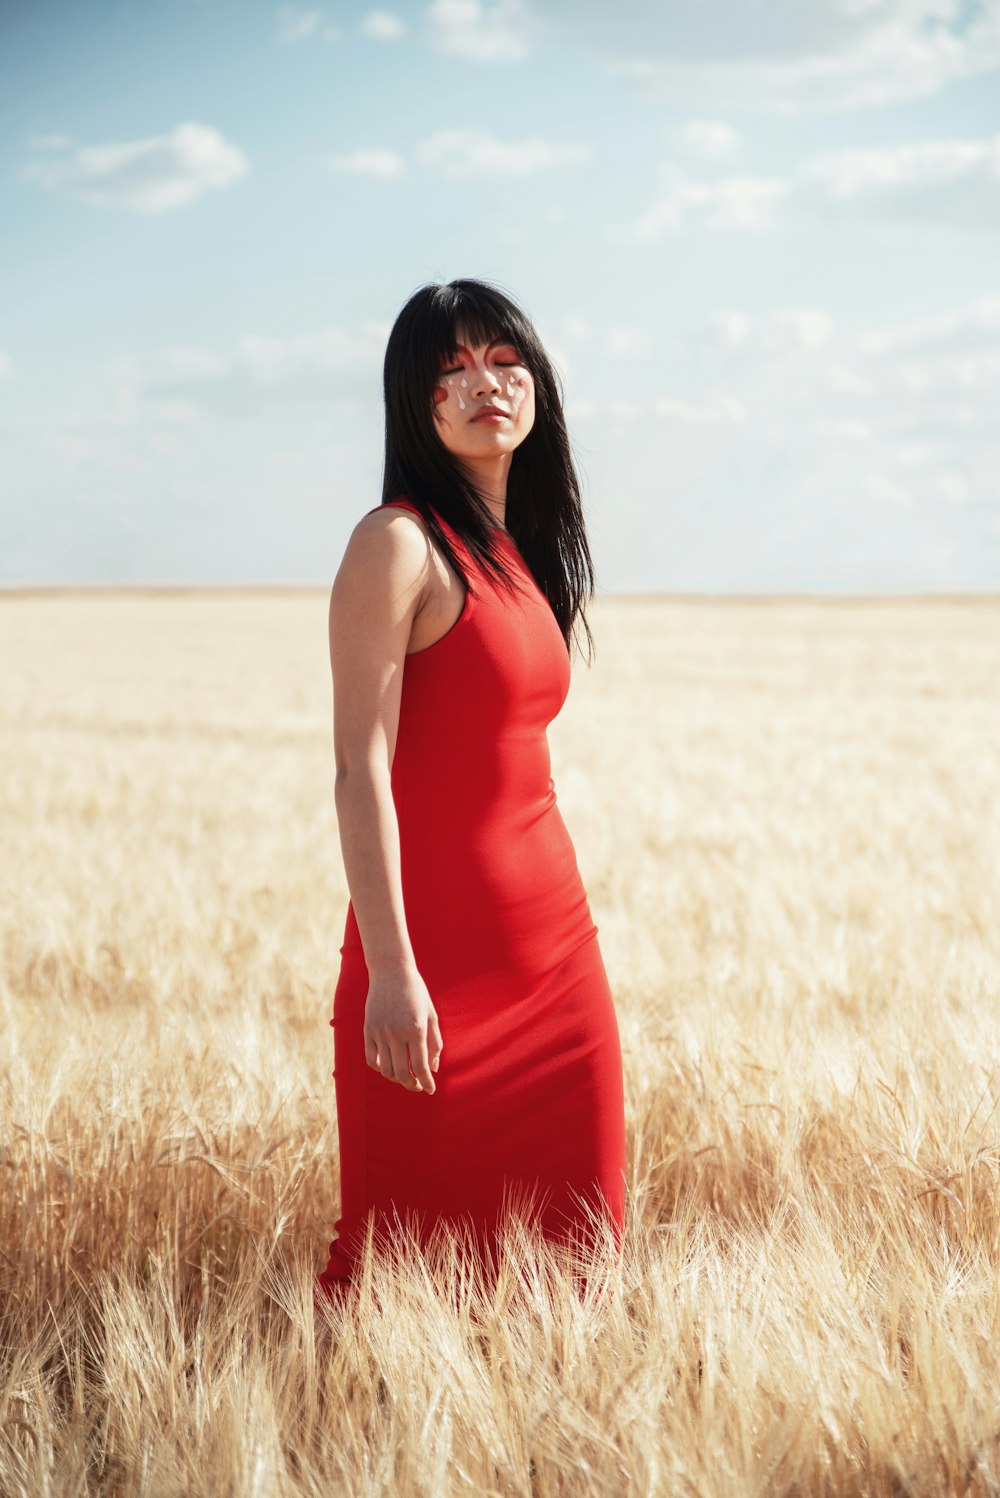 a woman in a red dress standing in a wheat field